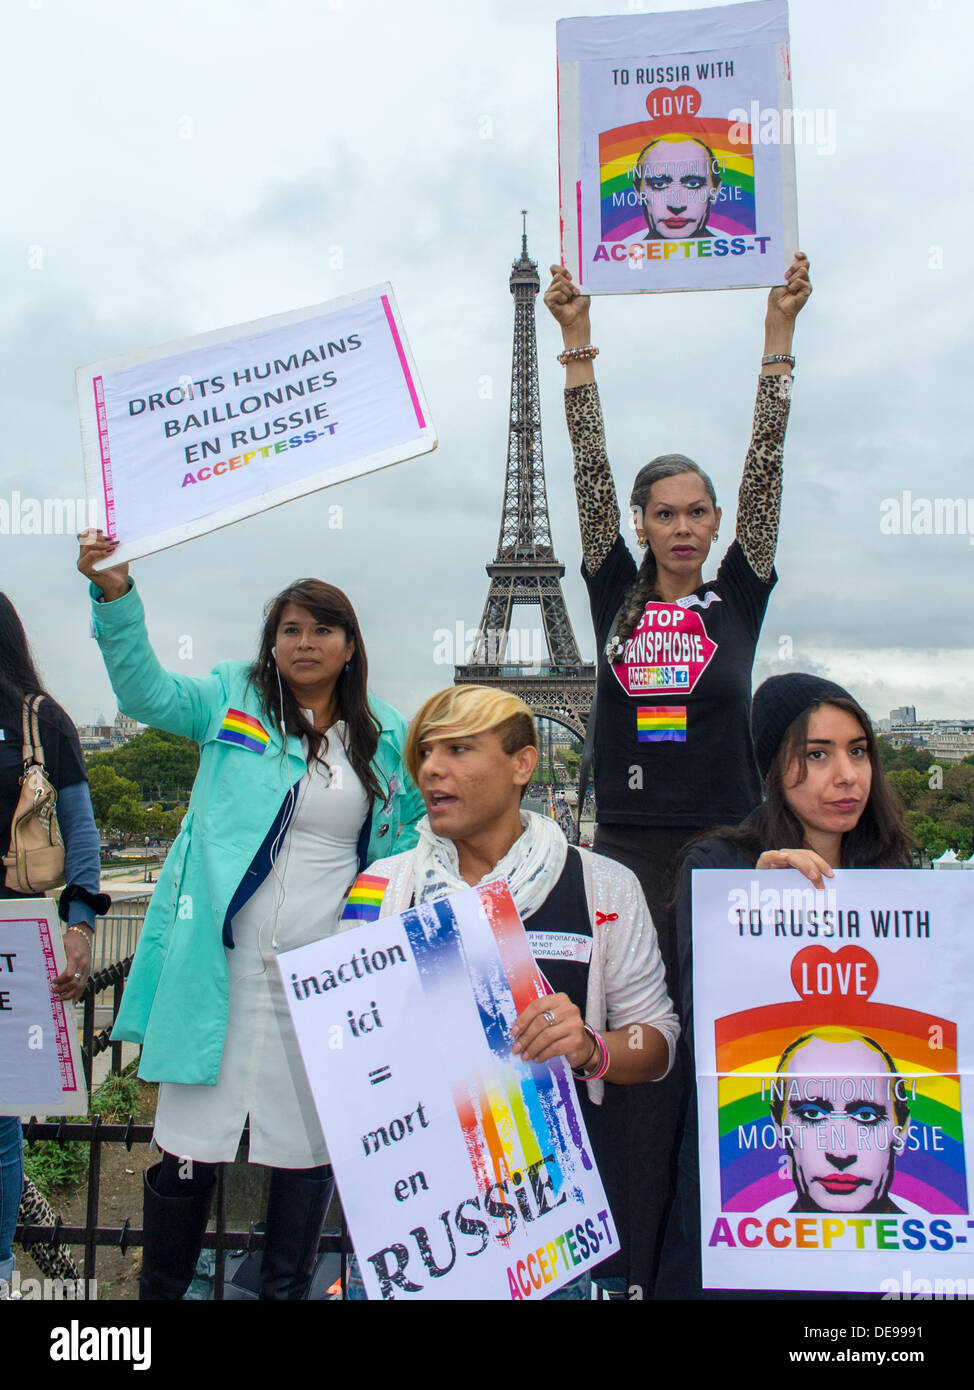 Paris, France. Several LGBTQ Activism Groups (Acceptess-t) held an Anti-Homophobia Law, in Russia, Demonstration, at Rights of Man Plaza, Group Trans People, Holding French Activist  protest poster putin image, anti putin, protester in france Stock Photo